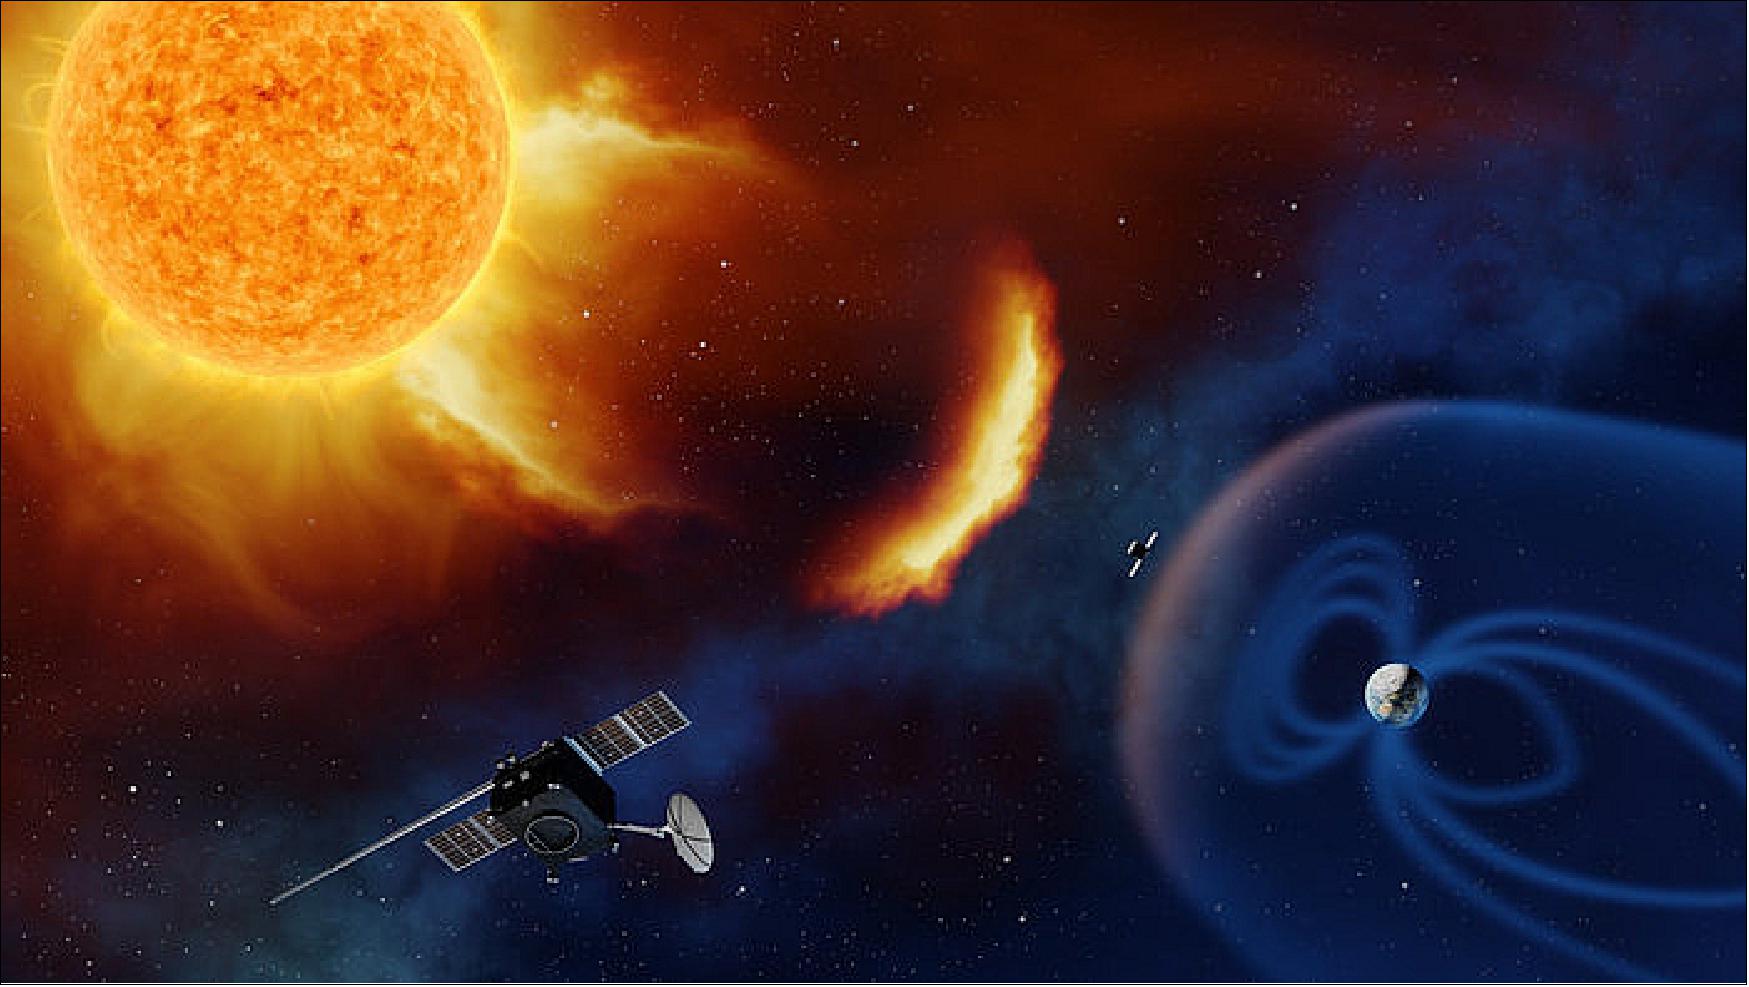 Figure 12: Side-on observing of Sun and Earth (image credit: ESA/A. Baker, CC BY-SA 3.0 IGO)